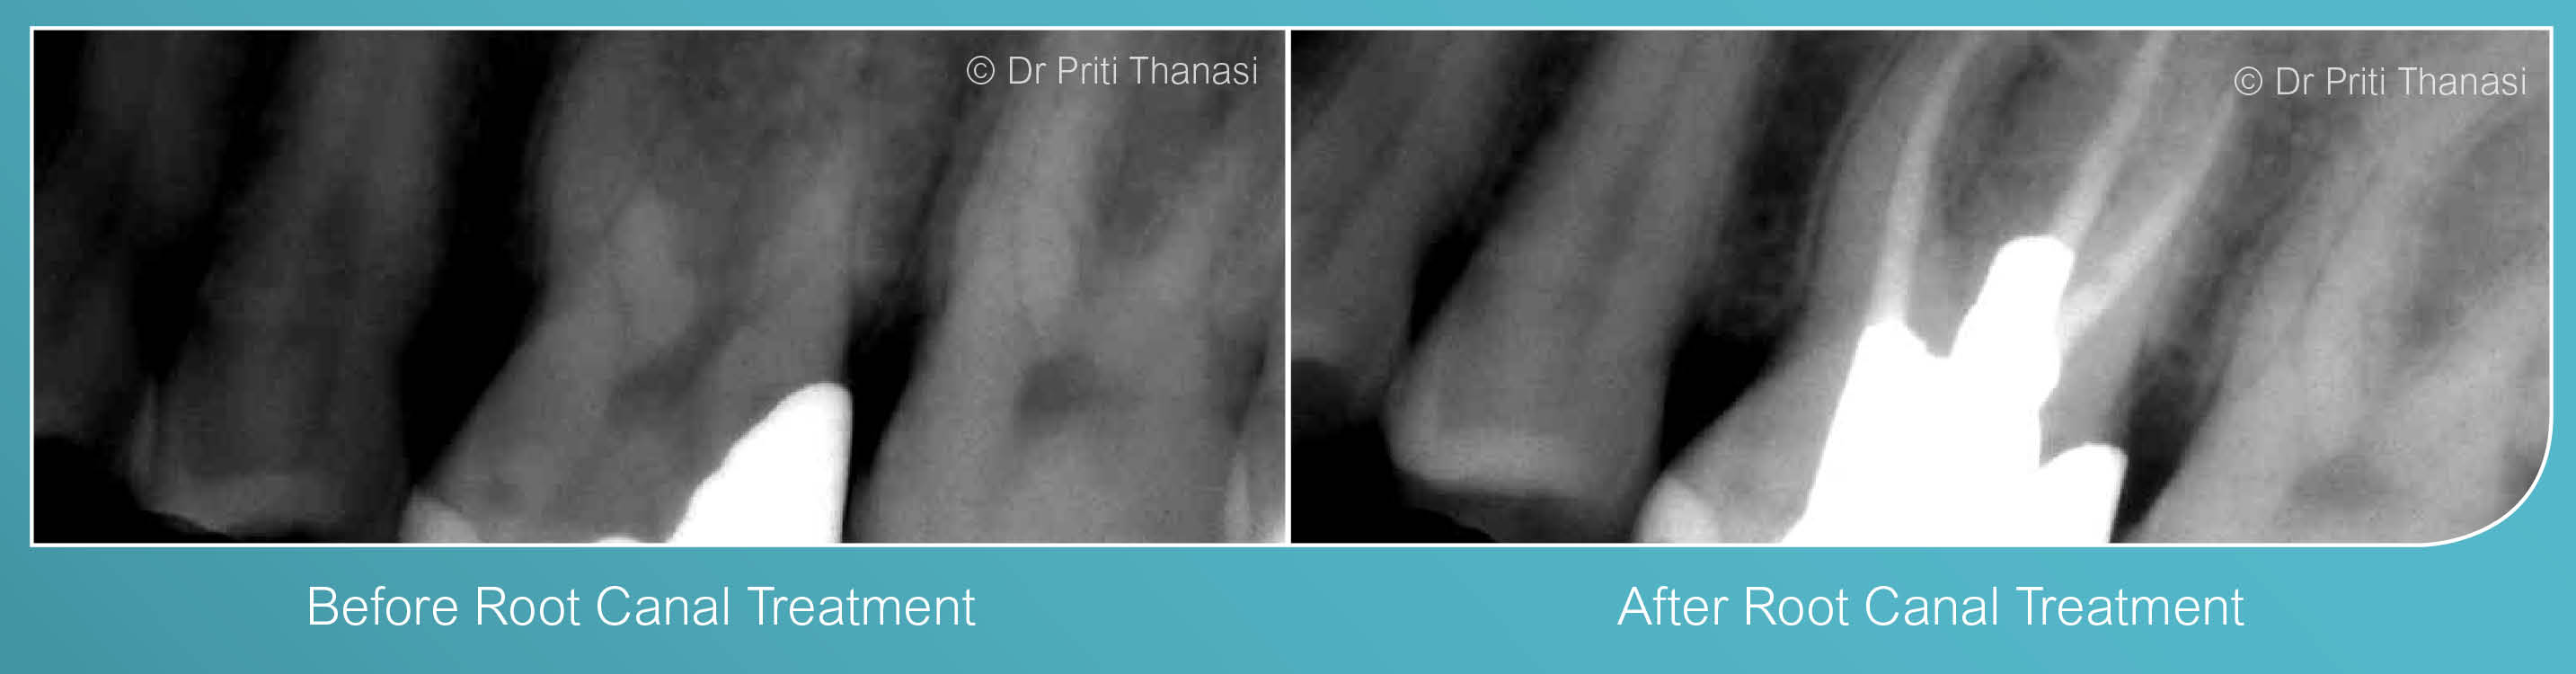 Before and after root canal treatment example 2